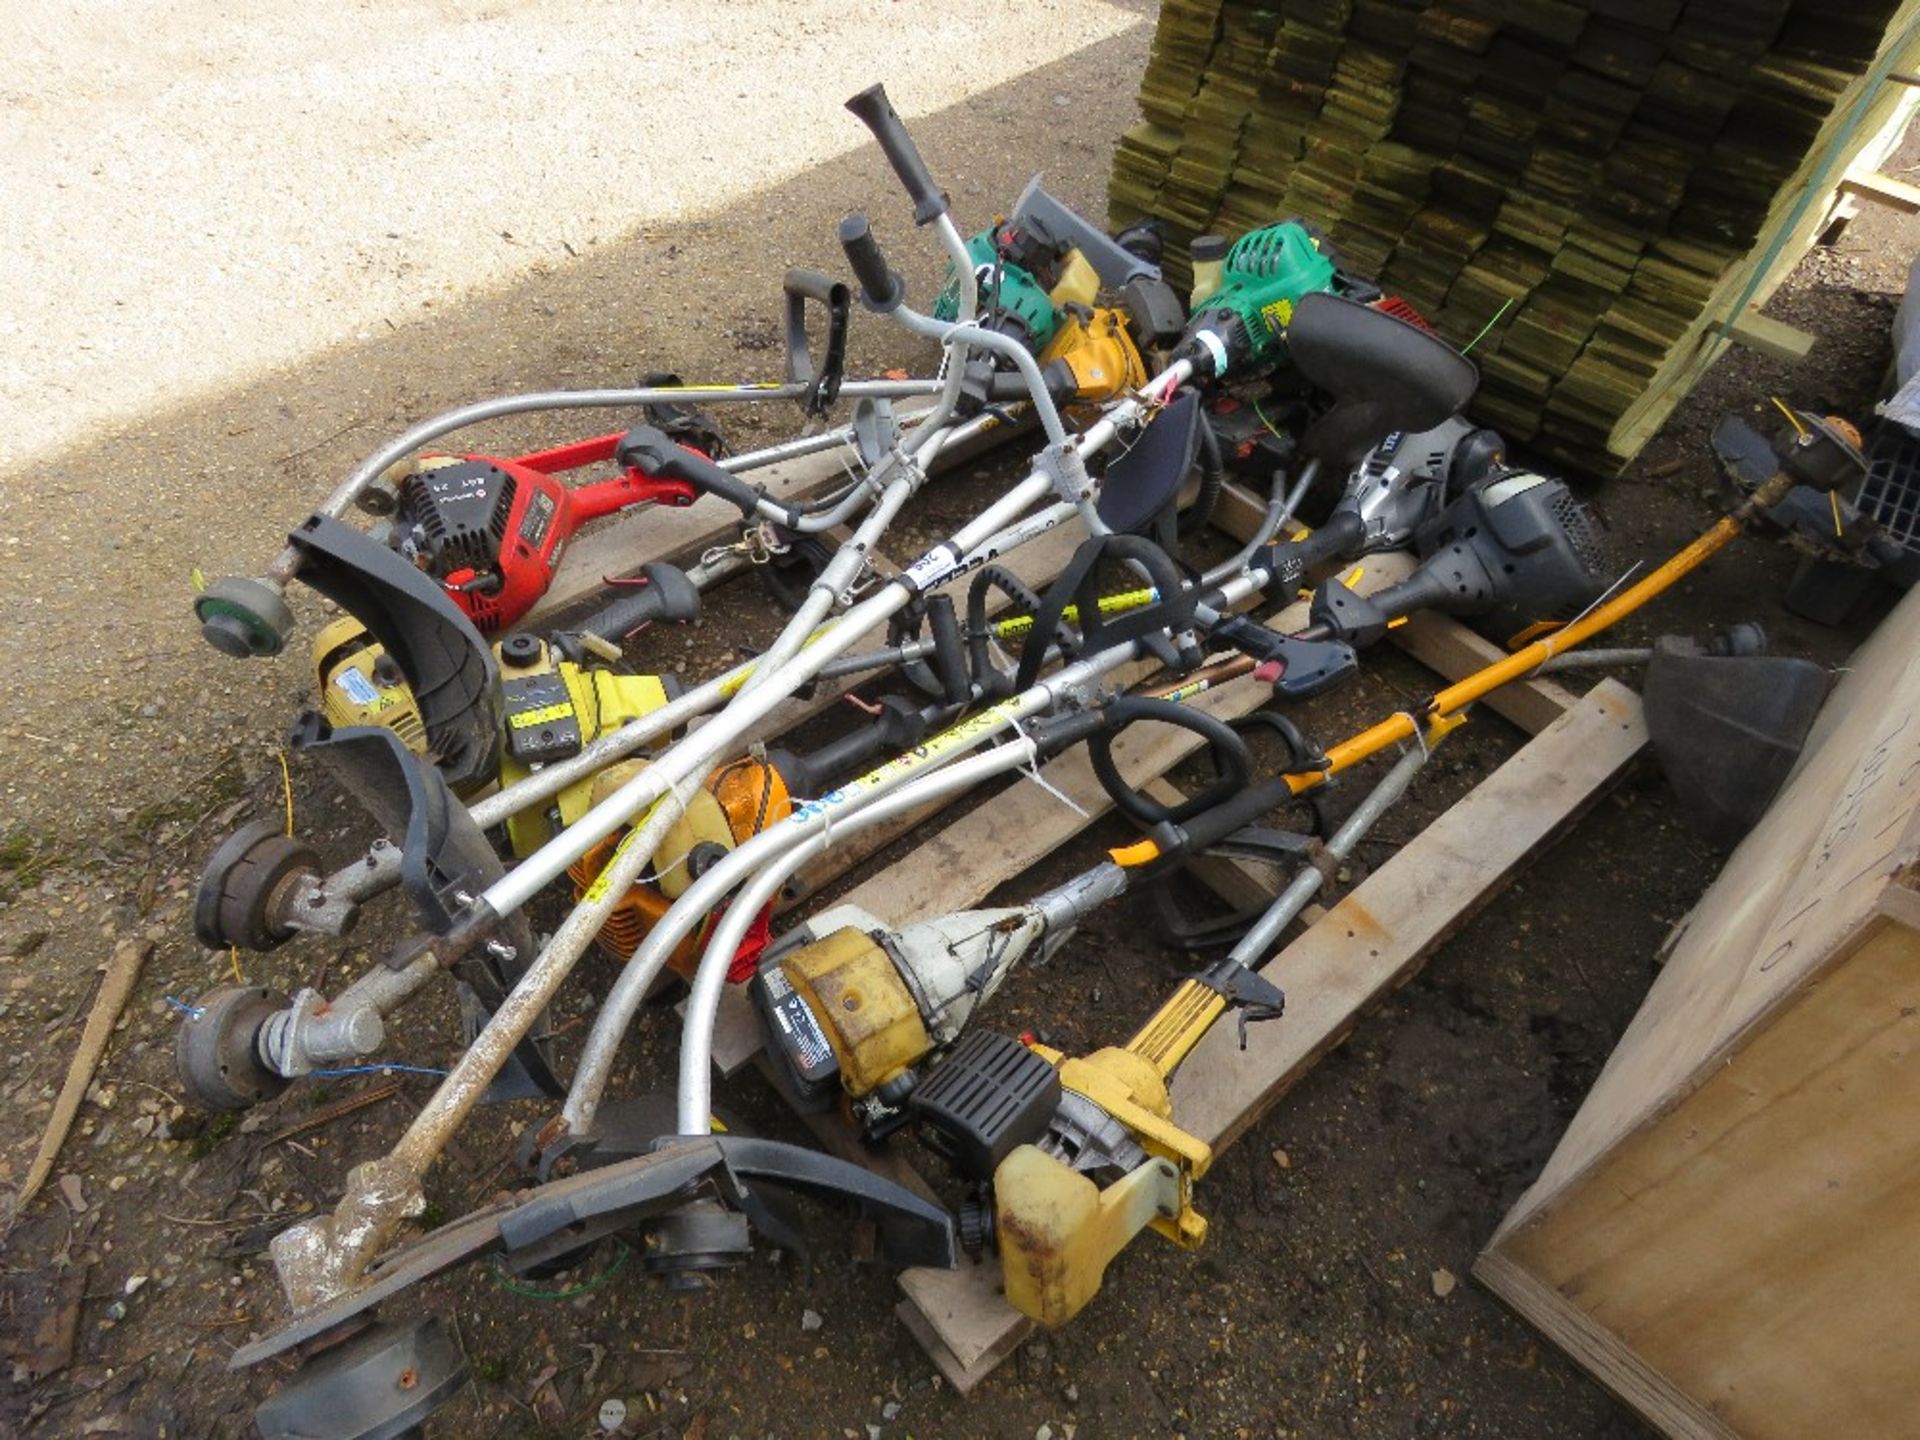 12NO ASSORTED PETROL ENGINED STRIMMERS. - Image 4 of 4